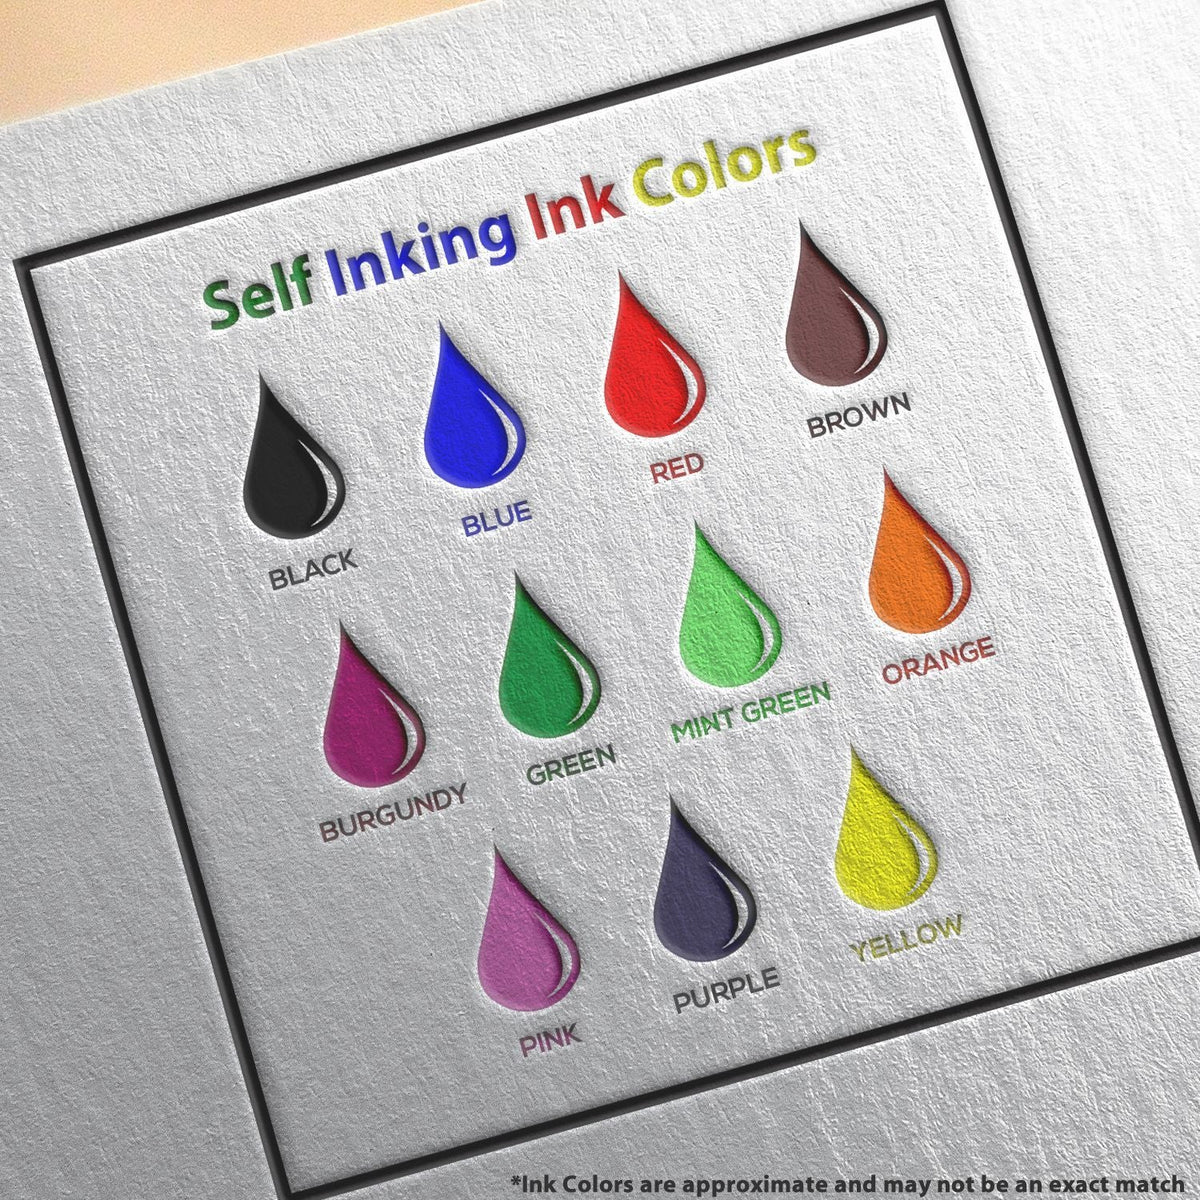 Self Inking Ink Colors Available